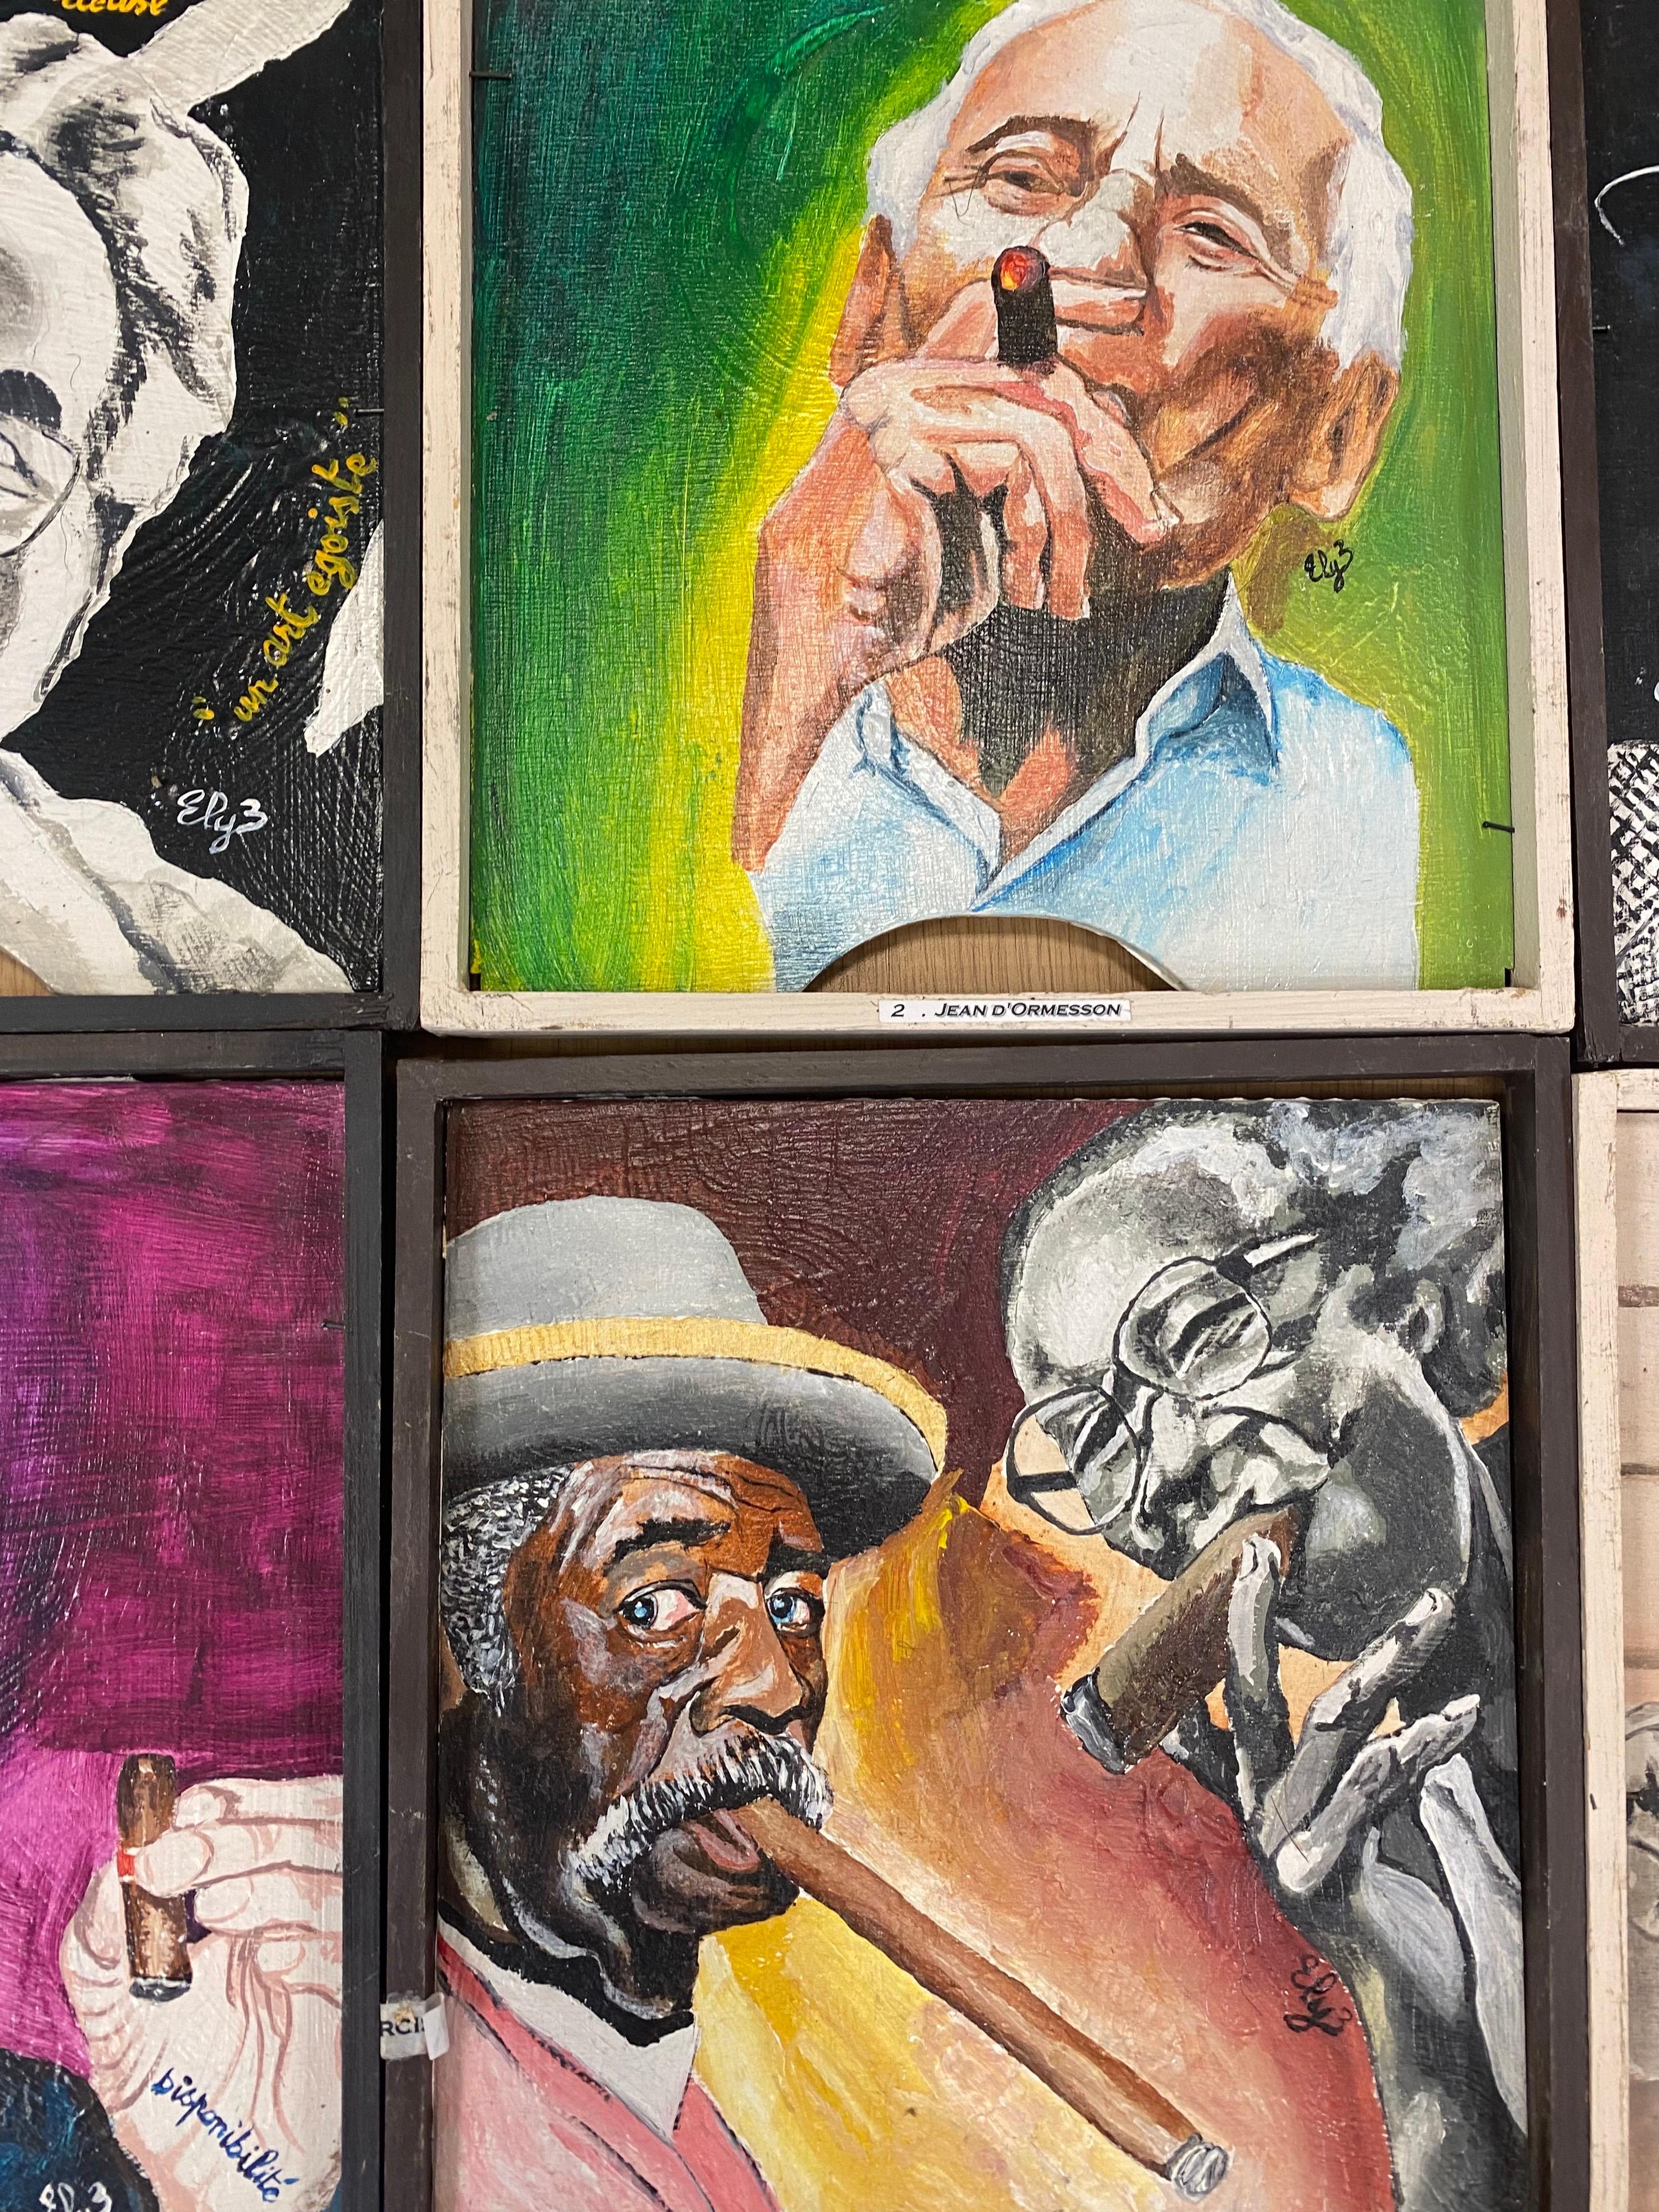 Gallery Wall Group Set of 21 Original French Oils - Portraits of Cigar Smokers - Brown Figurative Painting by Unknown